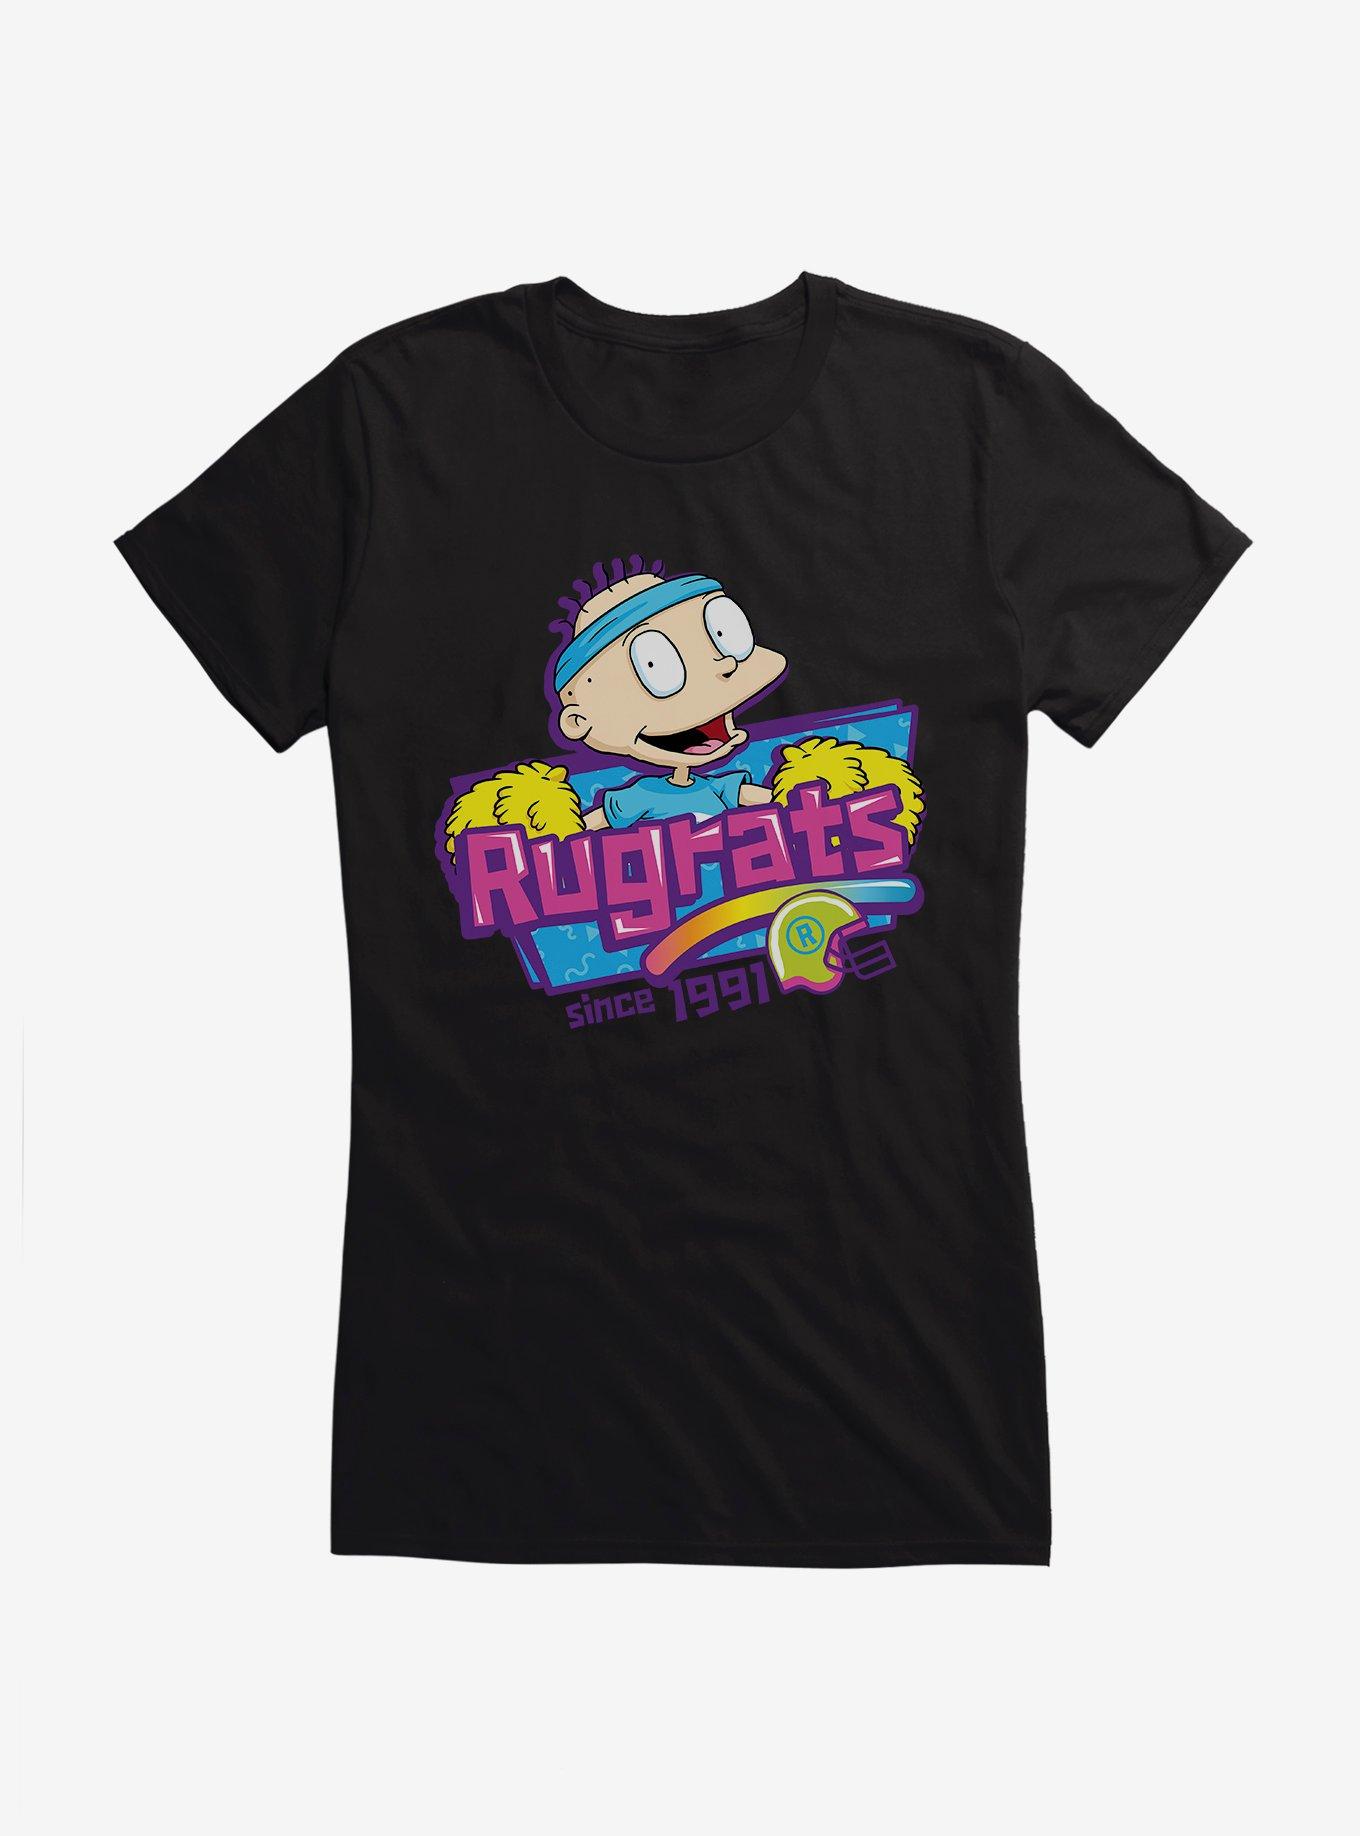 Rugrats Tommy Since 1991 Girls T-Shirt